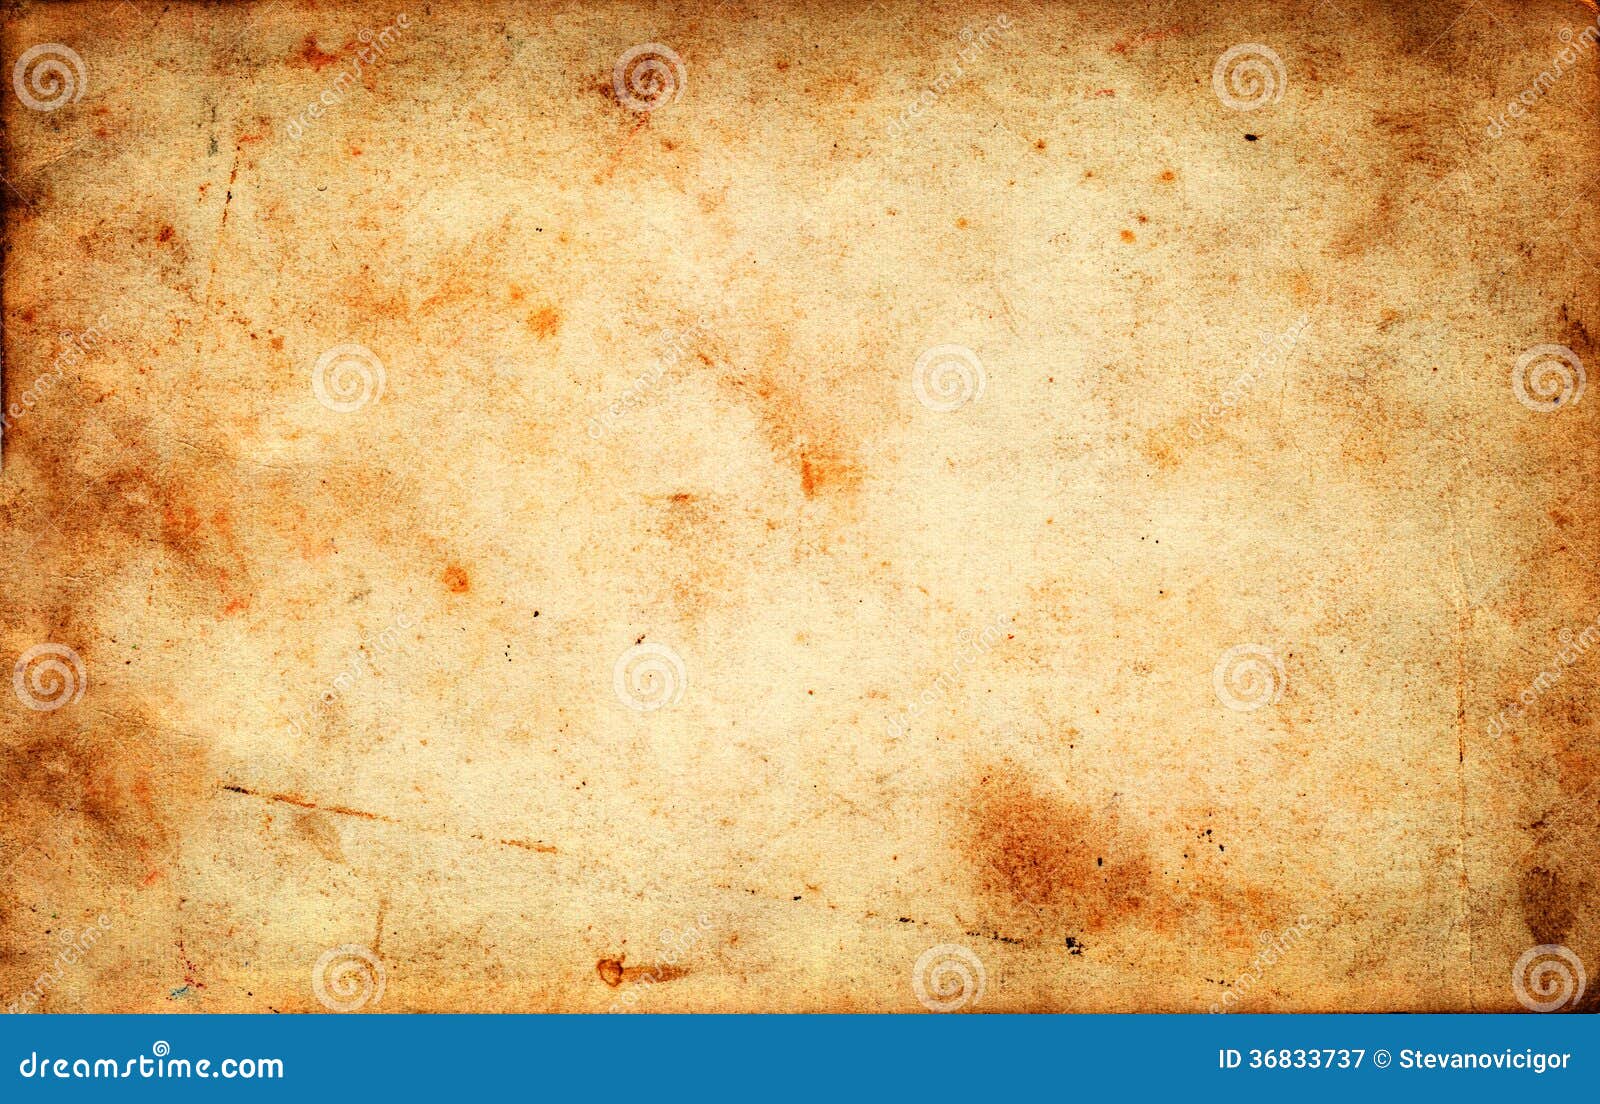 vintage grunge old paper texture as background